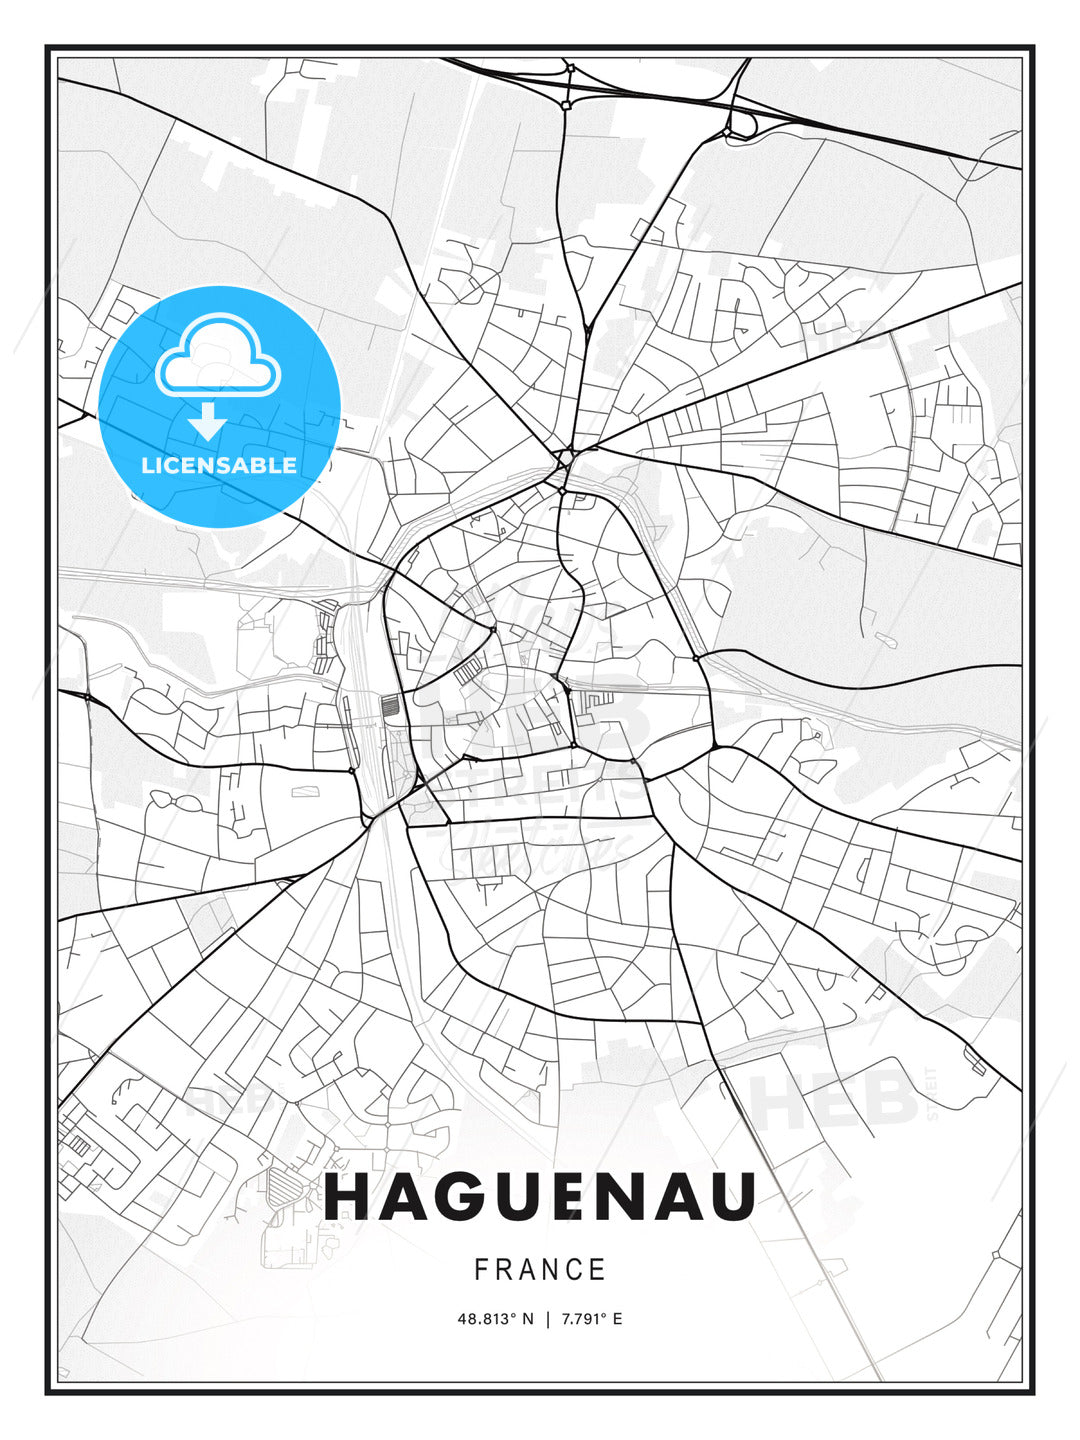 Haguenau, France, Modern Print Template in Various Formats - HEBSTREITS Sketches